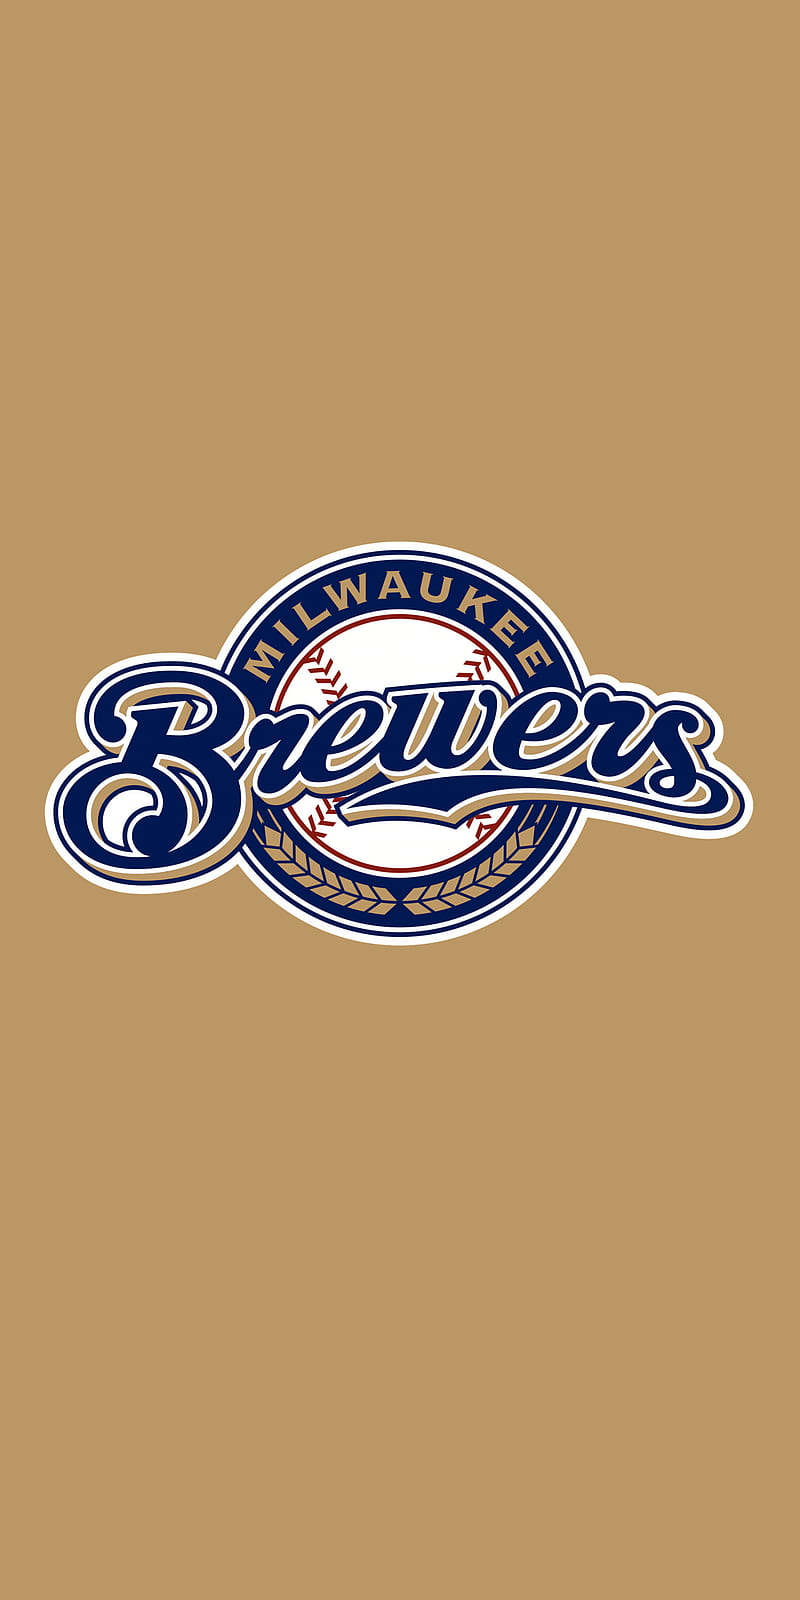 Milwaukee Brewers Emblem  Chrome  Fanmats  Sports Licensing Solutions  LLC